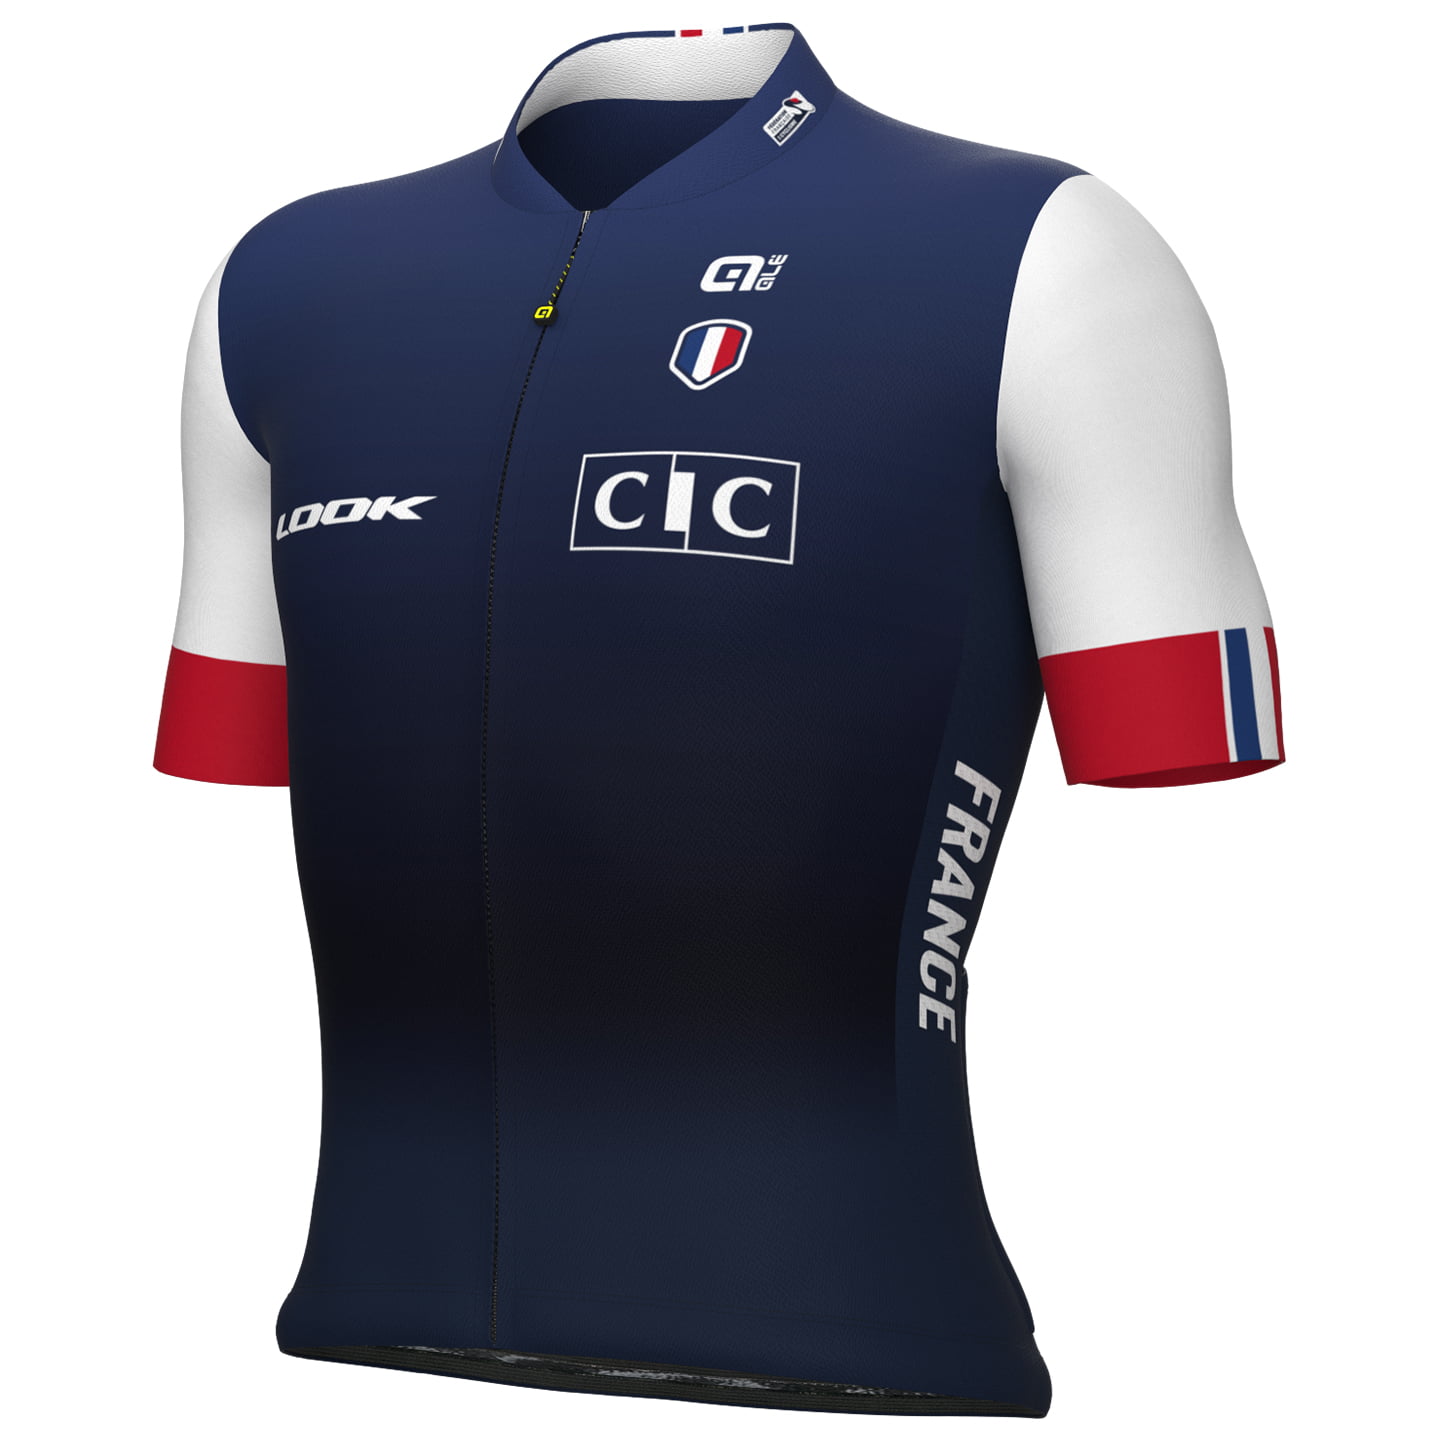 FRENCH NATIONAL TEAM 2023 Short Sleeve Jersey, for men, size L, Cycling shirt, Cycle clothing